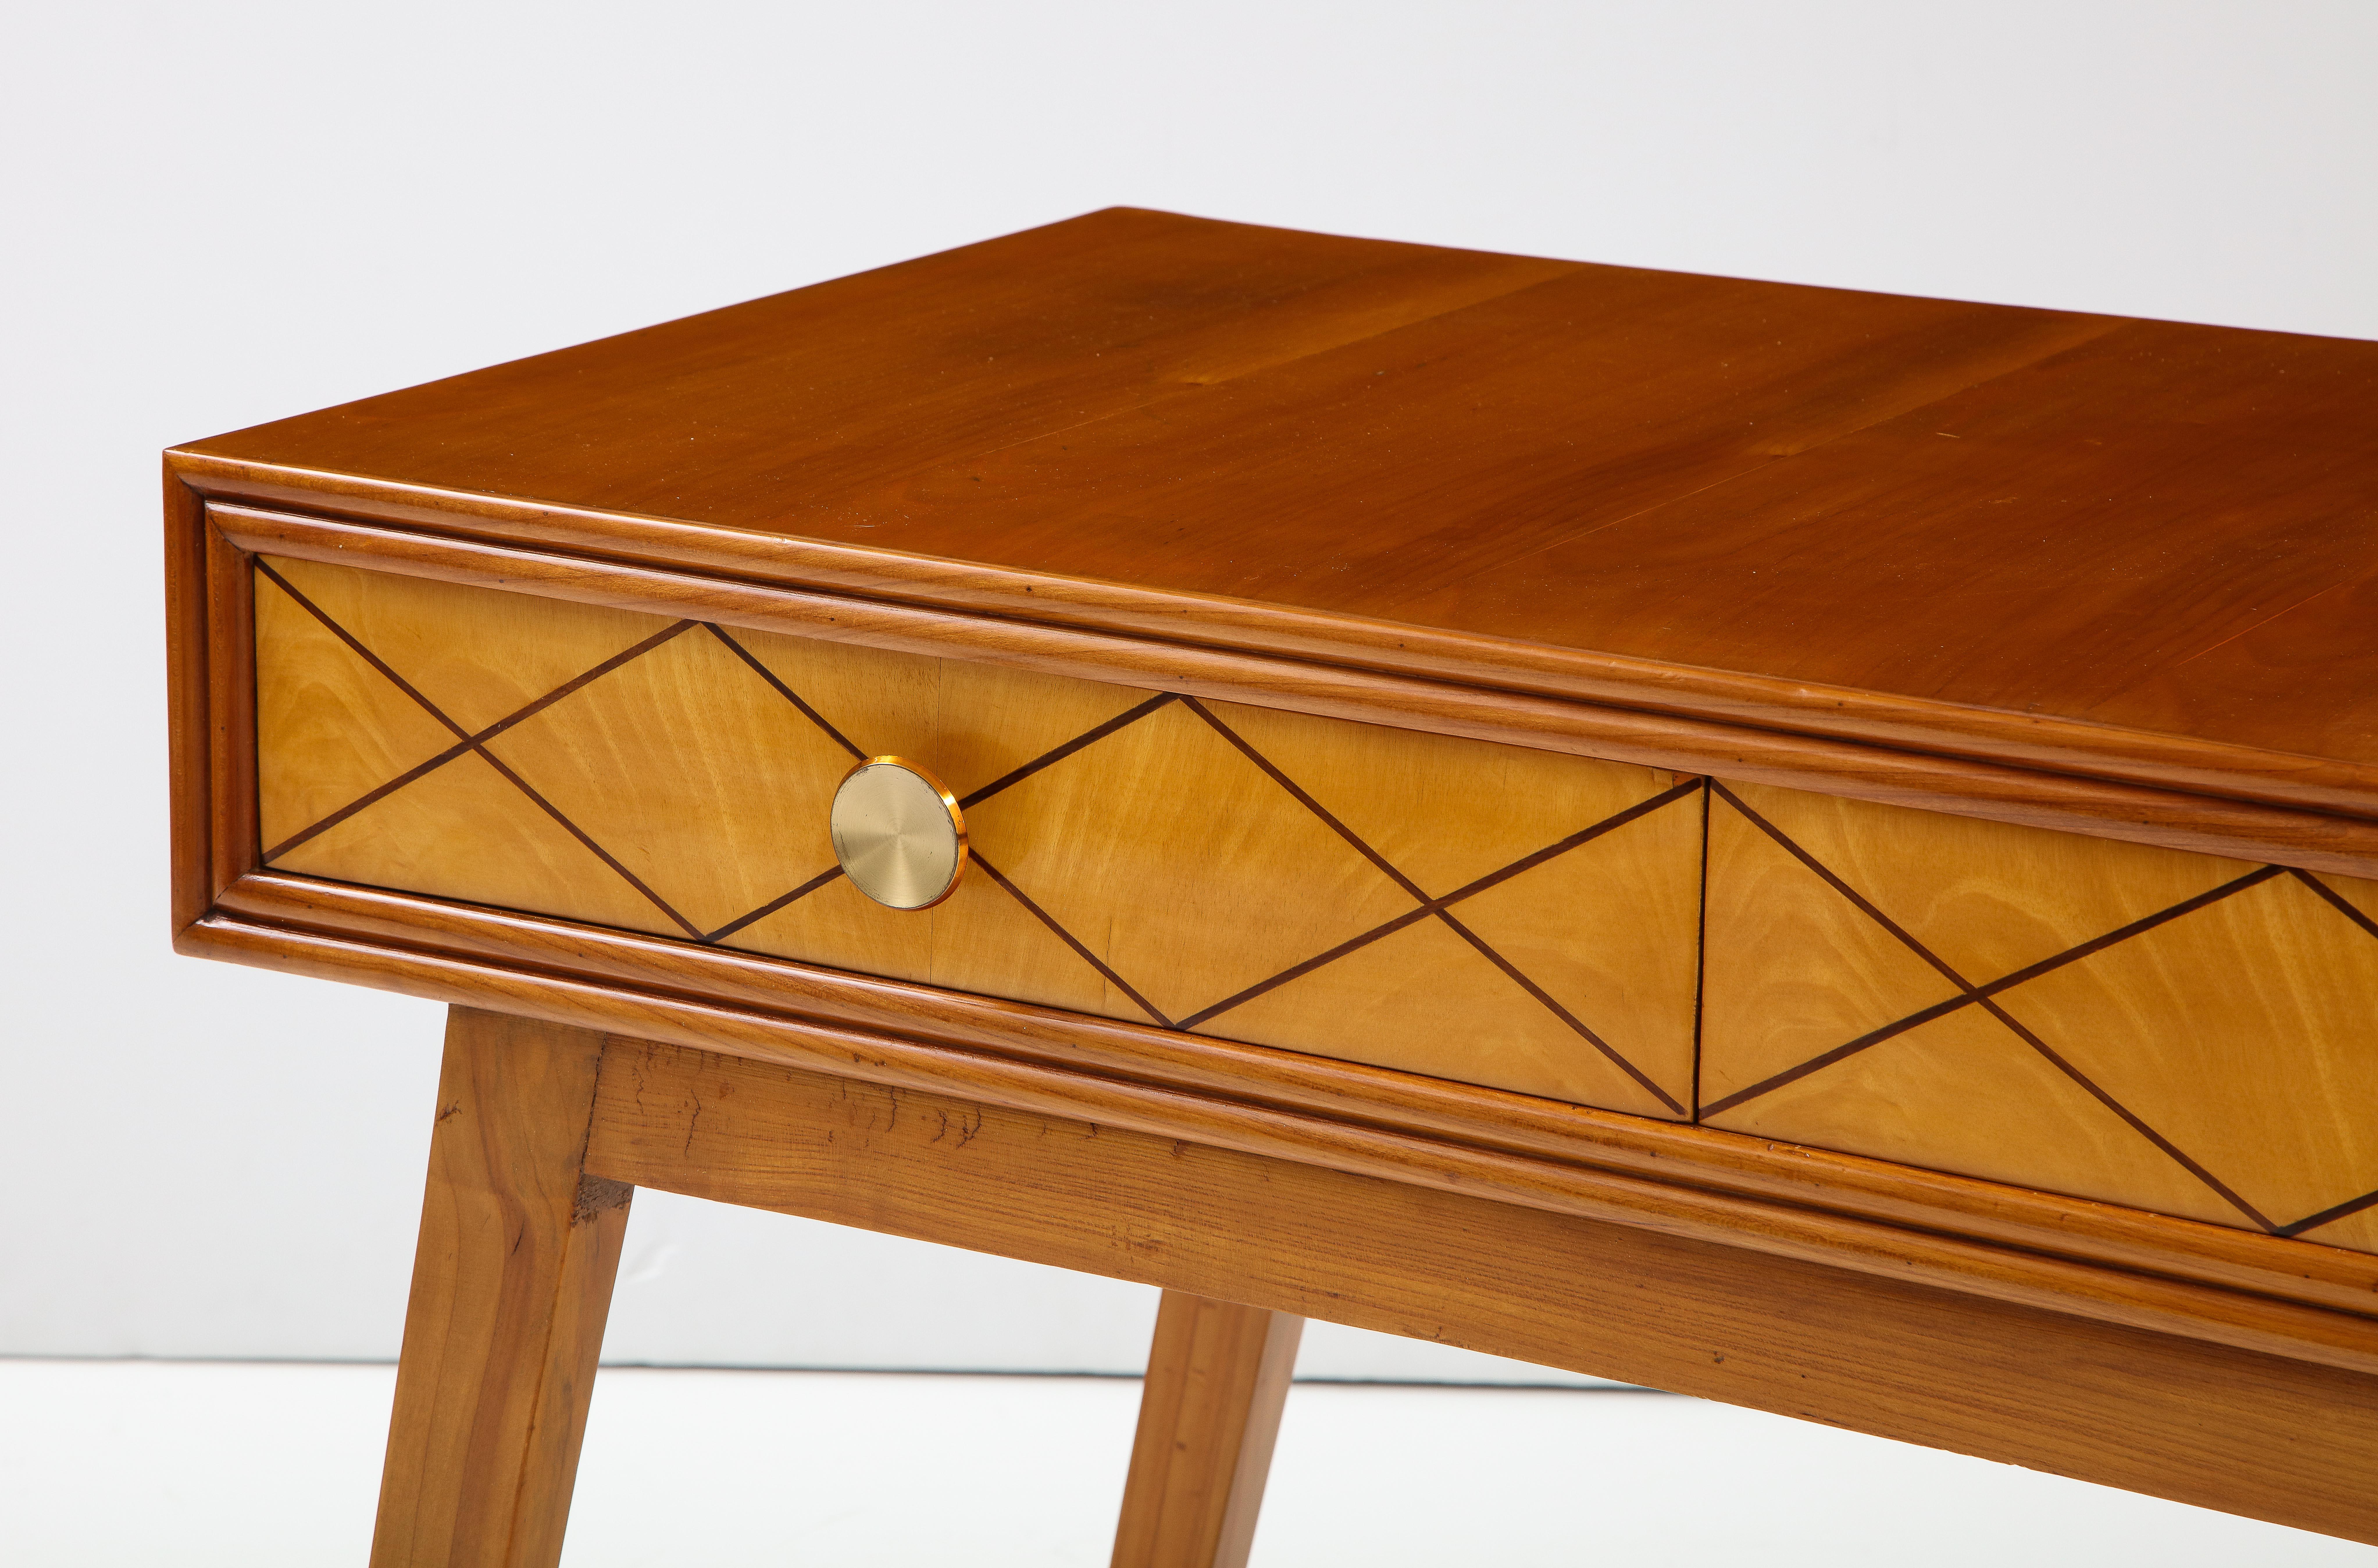 An elegant Italian 1950's maple wood desk; the rectangular apron inlaid in walnut geometric motif and with two drawers, opened with sleek circular brass handles. The whole supported on canted tapered legs. Can be used as a desk, vanity or table;